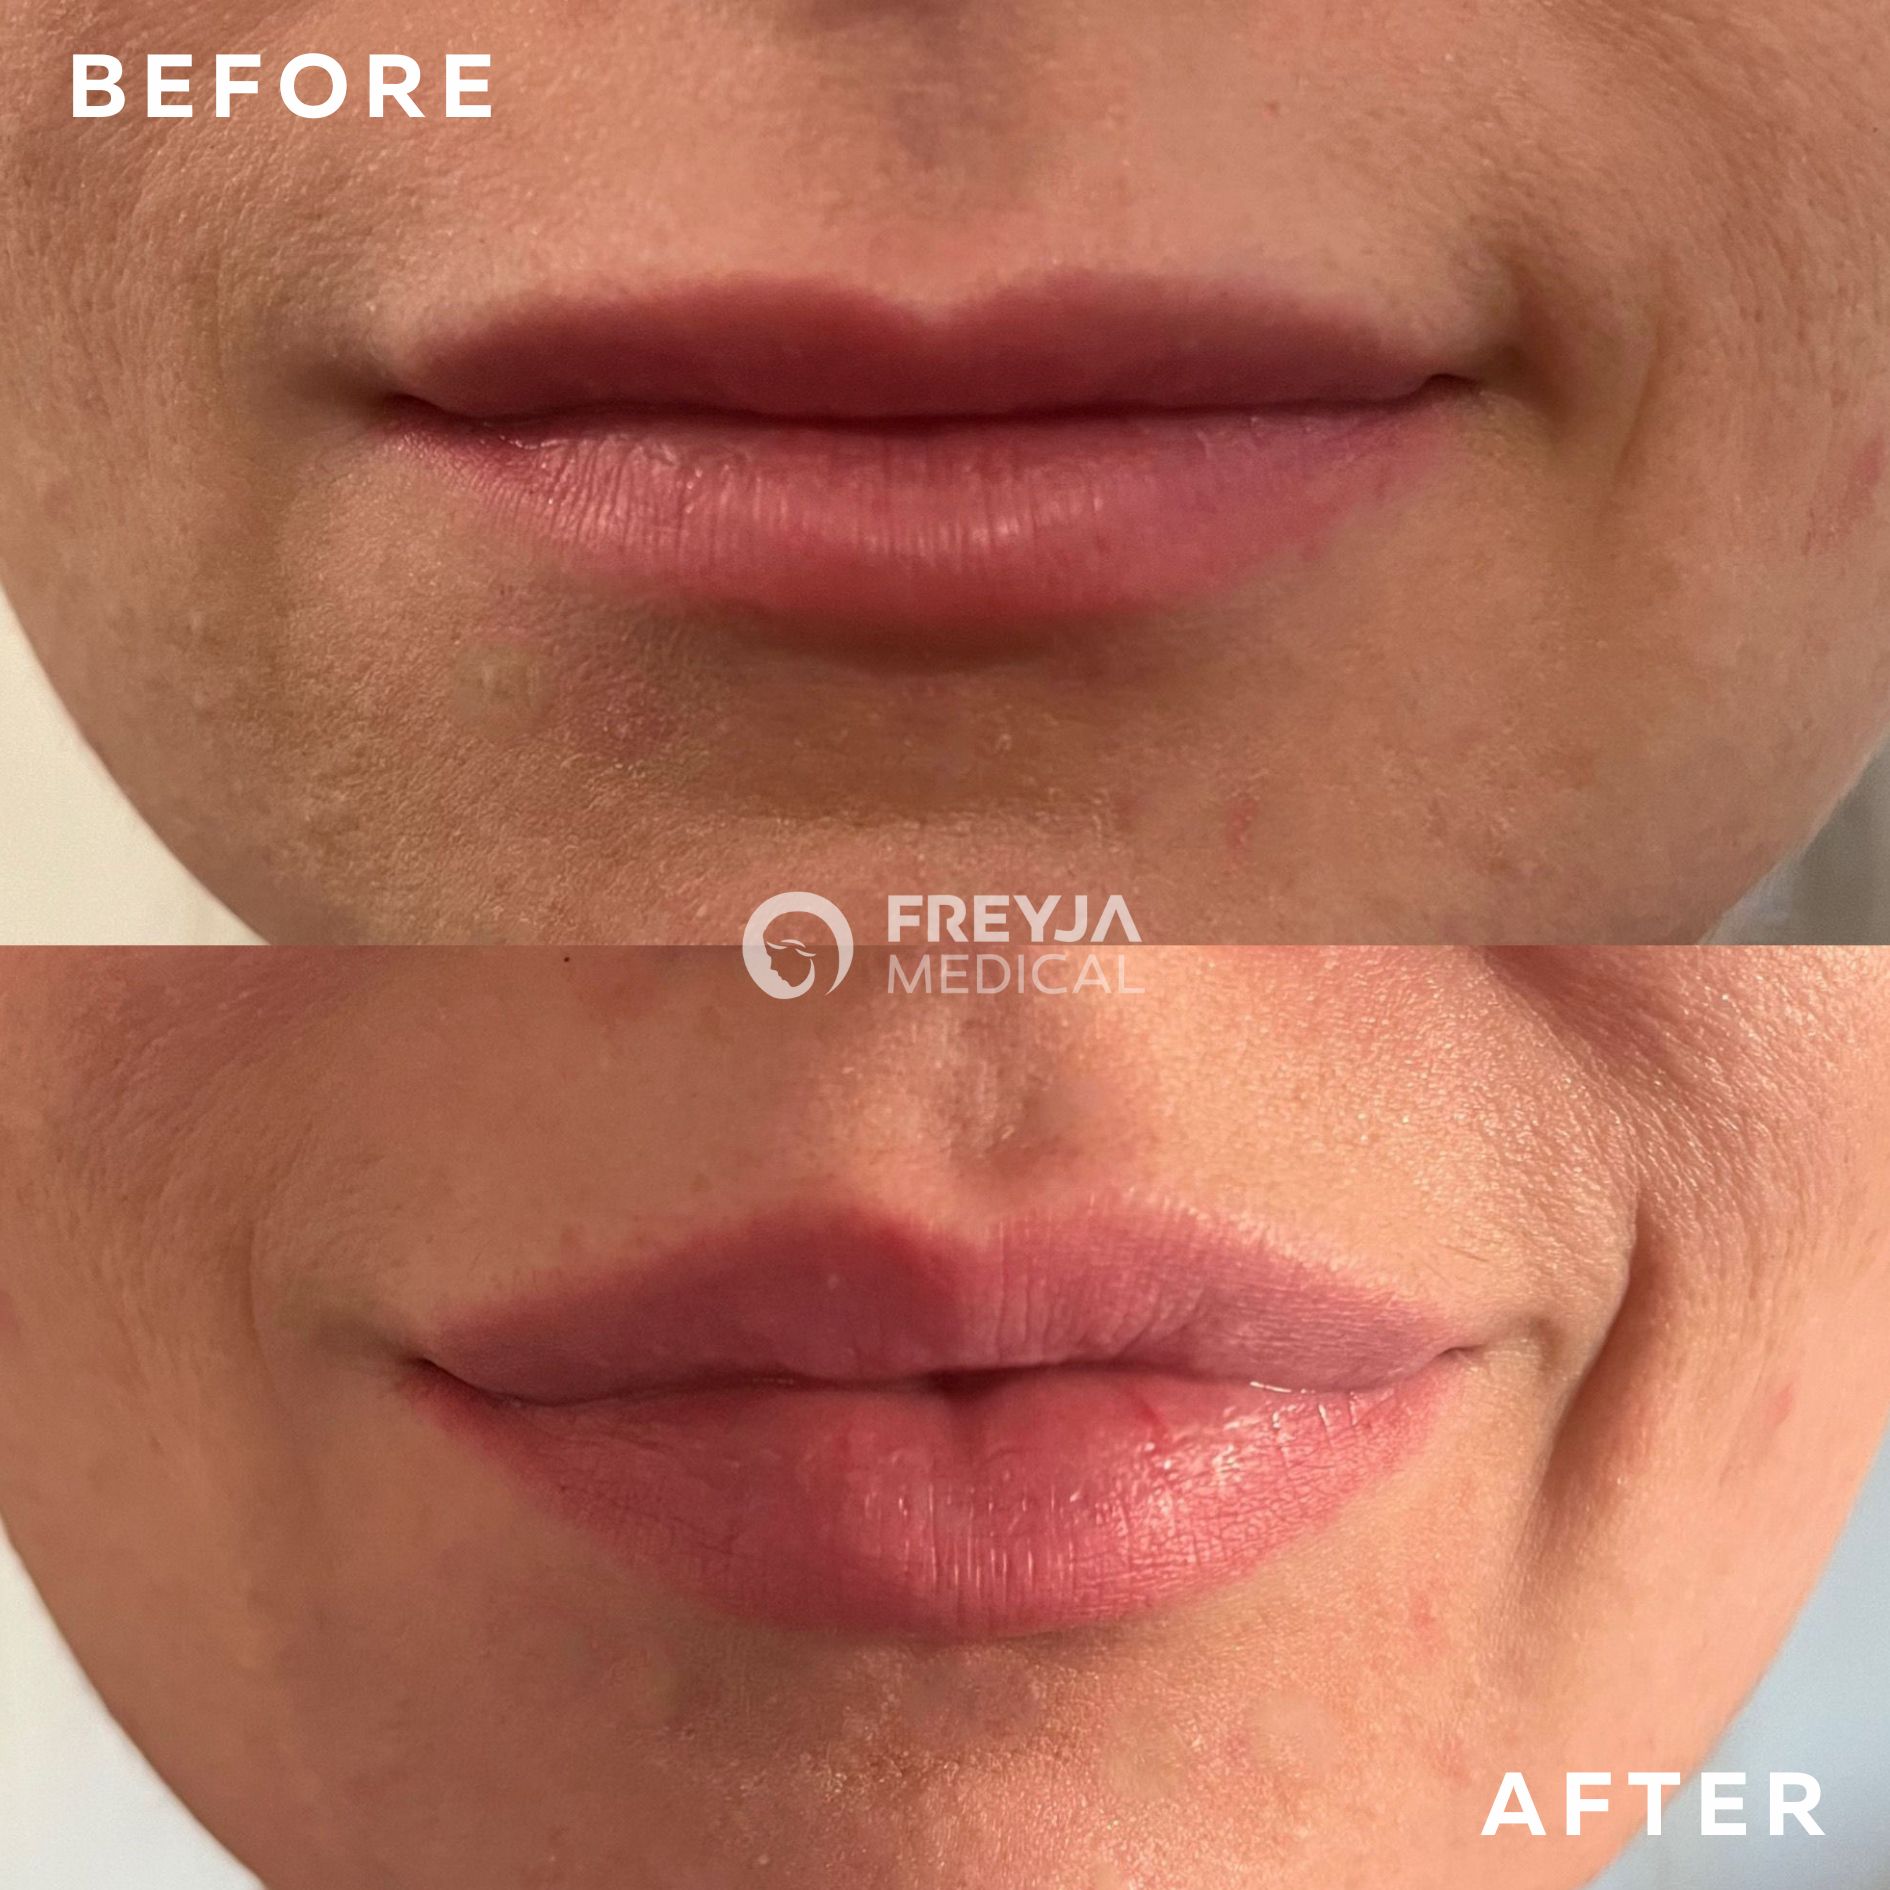 Dermal fillers for thin lips at Freyja Medical in Wrexham, Nantwich and Cheshire